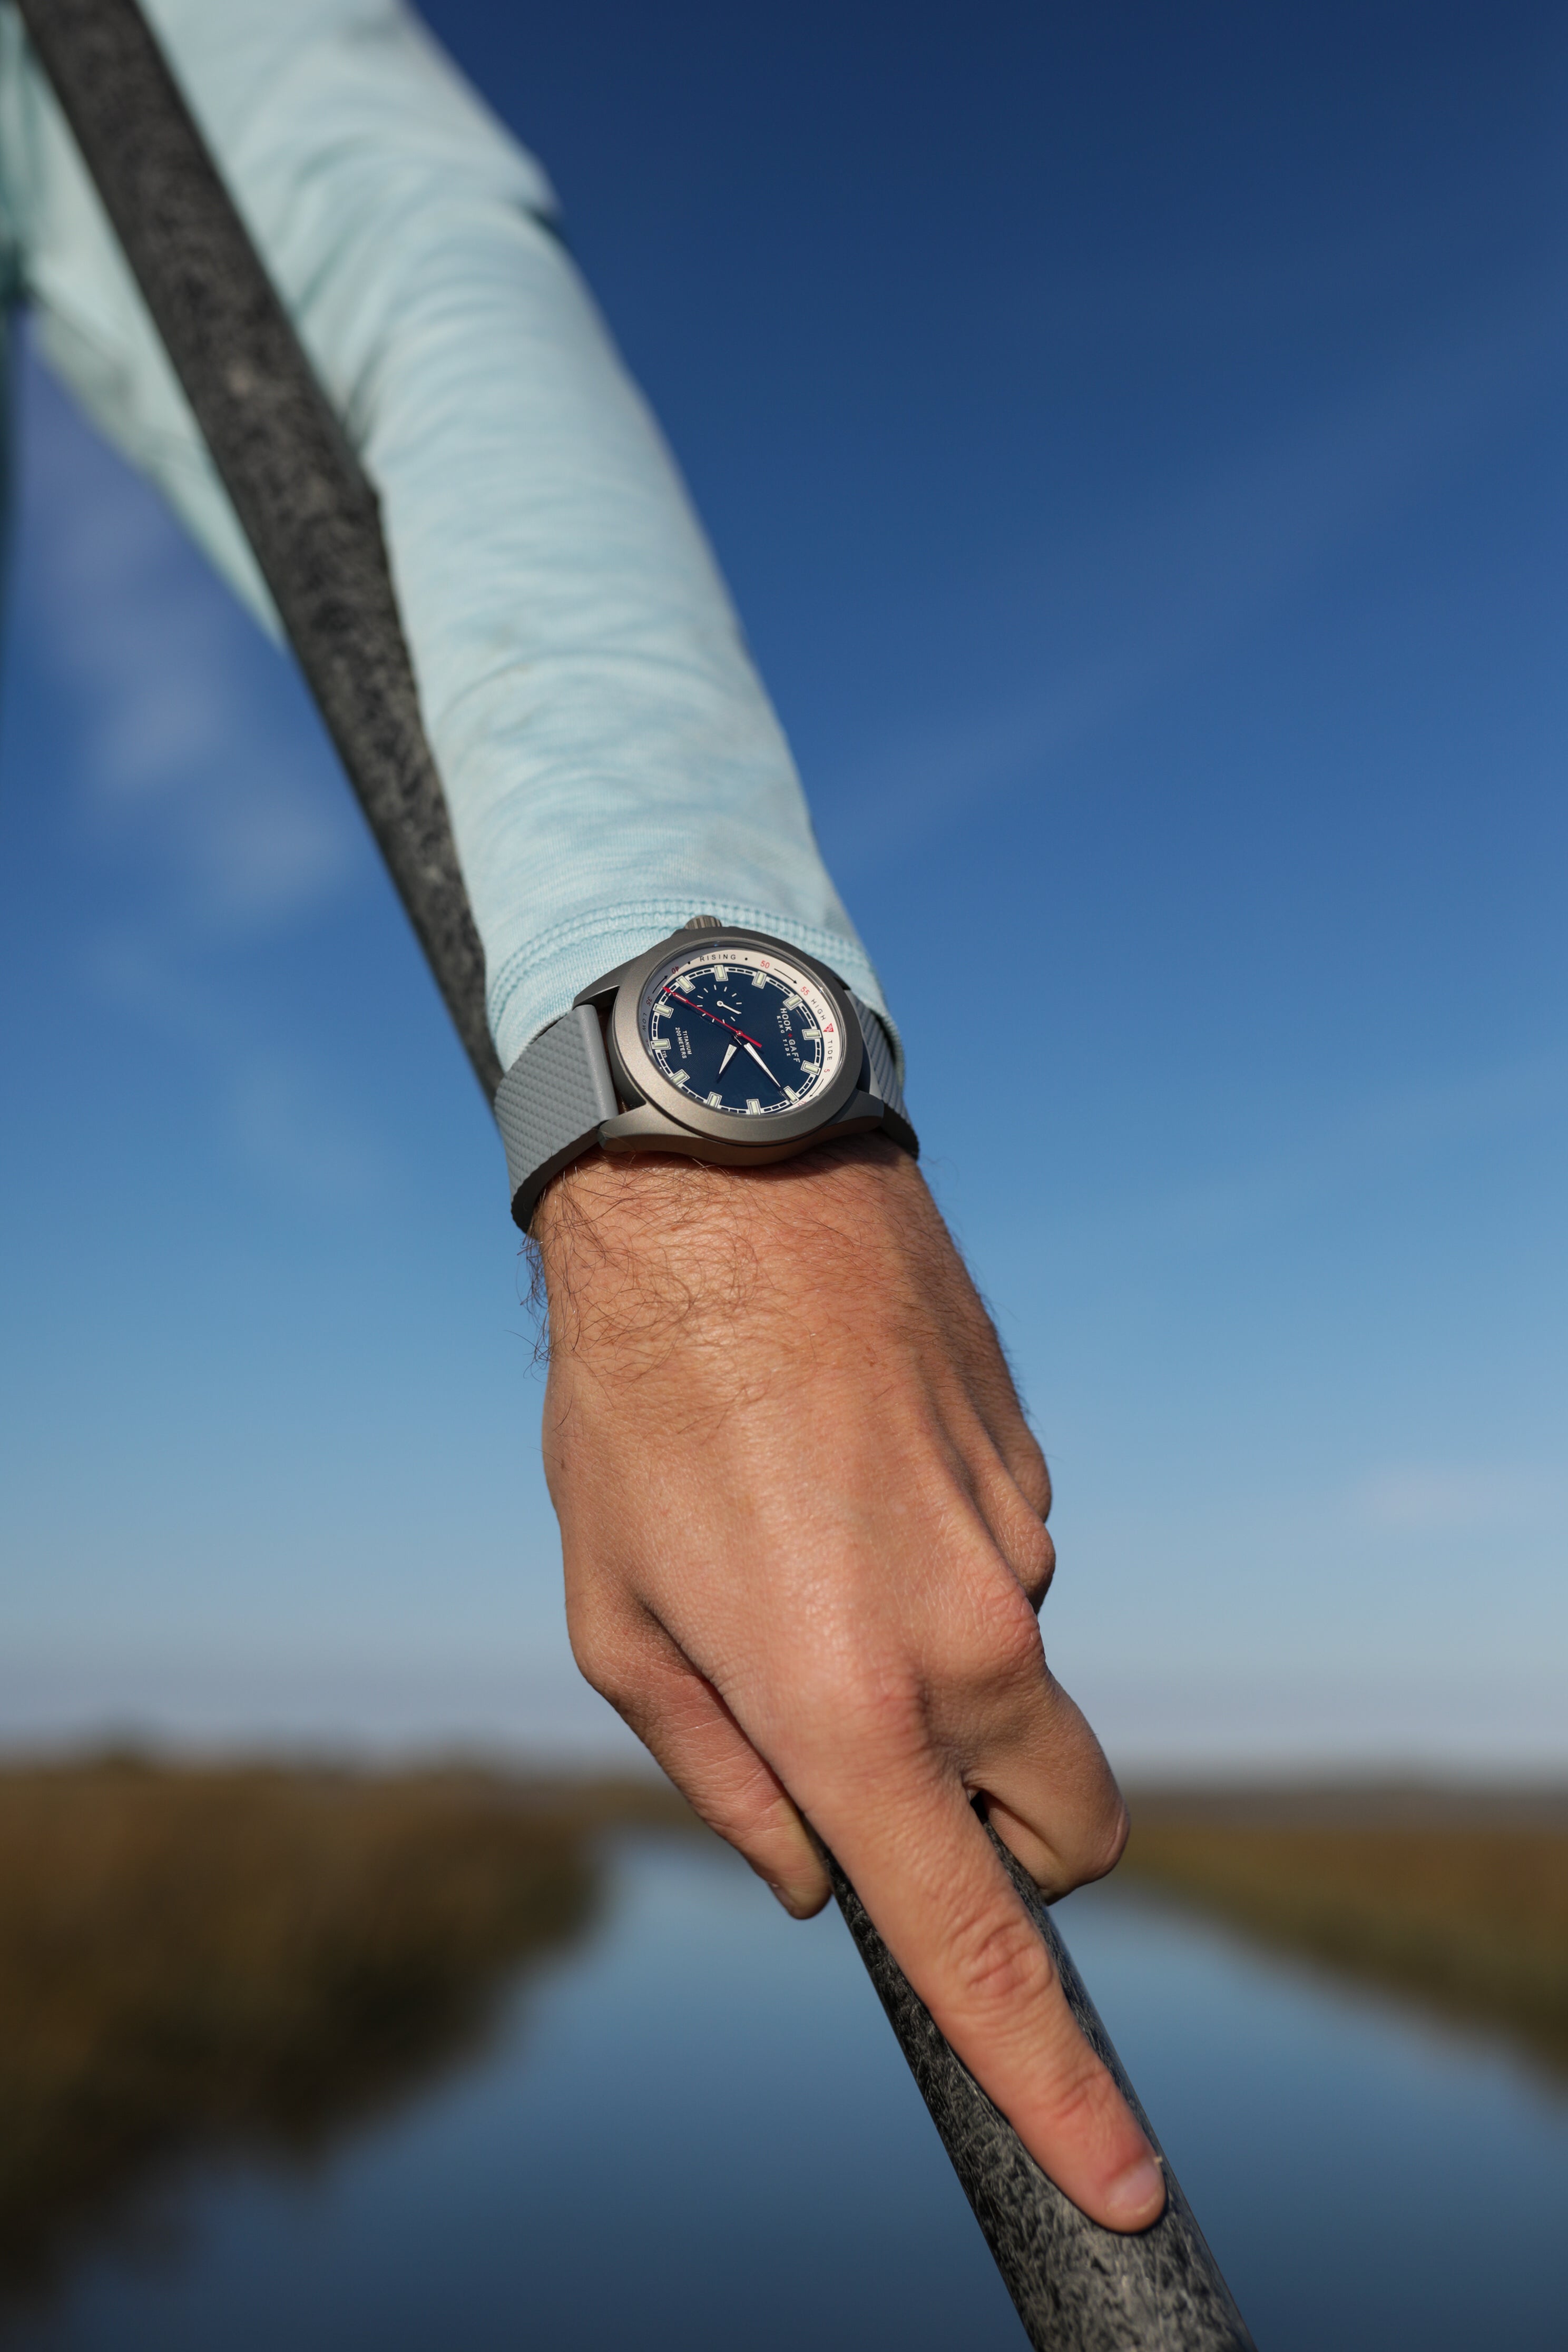 The king tide watch by Hook and Gaff. Letting you know when it's time for  fishing or time for Blanton's.